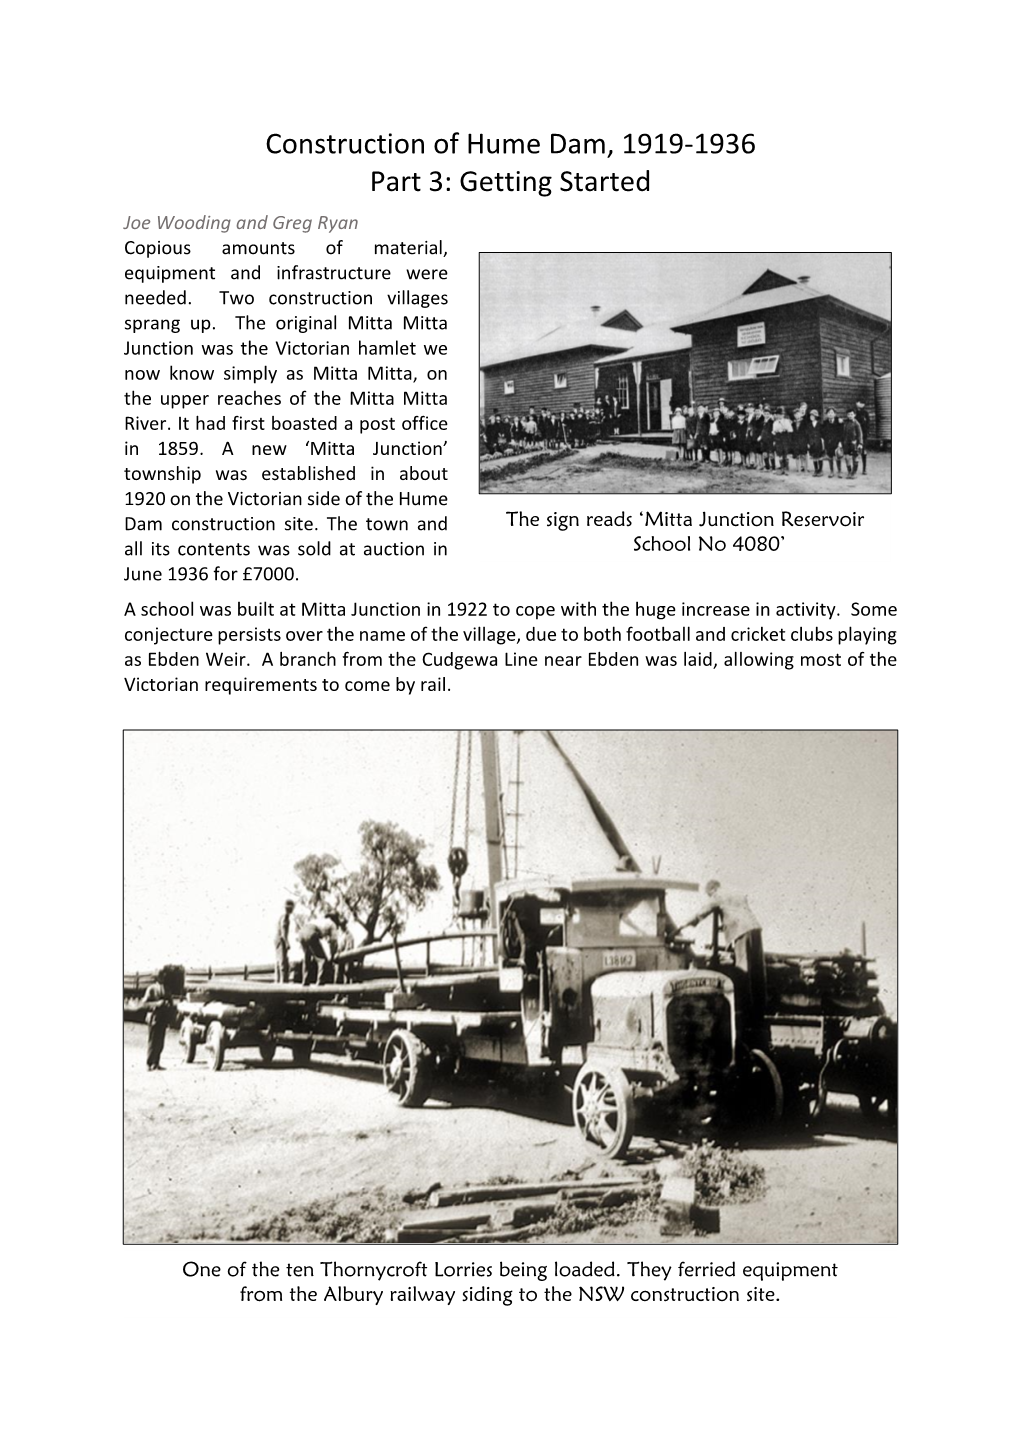 Construction of Hume Dam, 1919-1936 Part 3: Getting Started Joe Wooding and Greg Ryan Copious Amounts of Material, Equipment and Infrastructure Were Needed